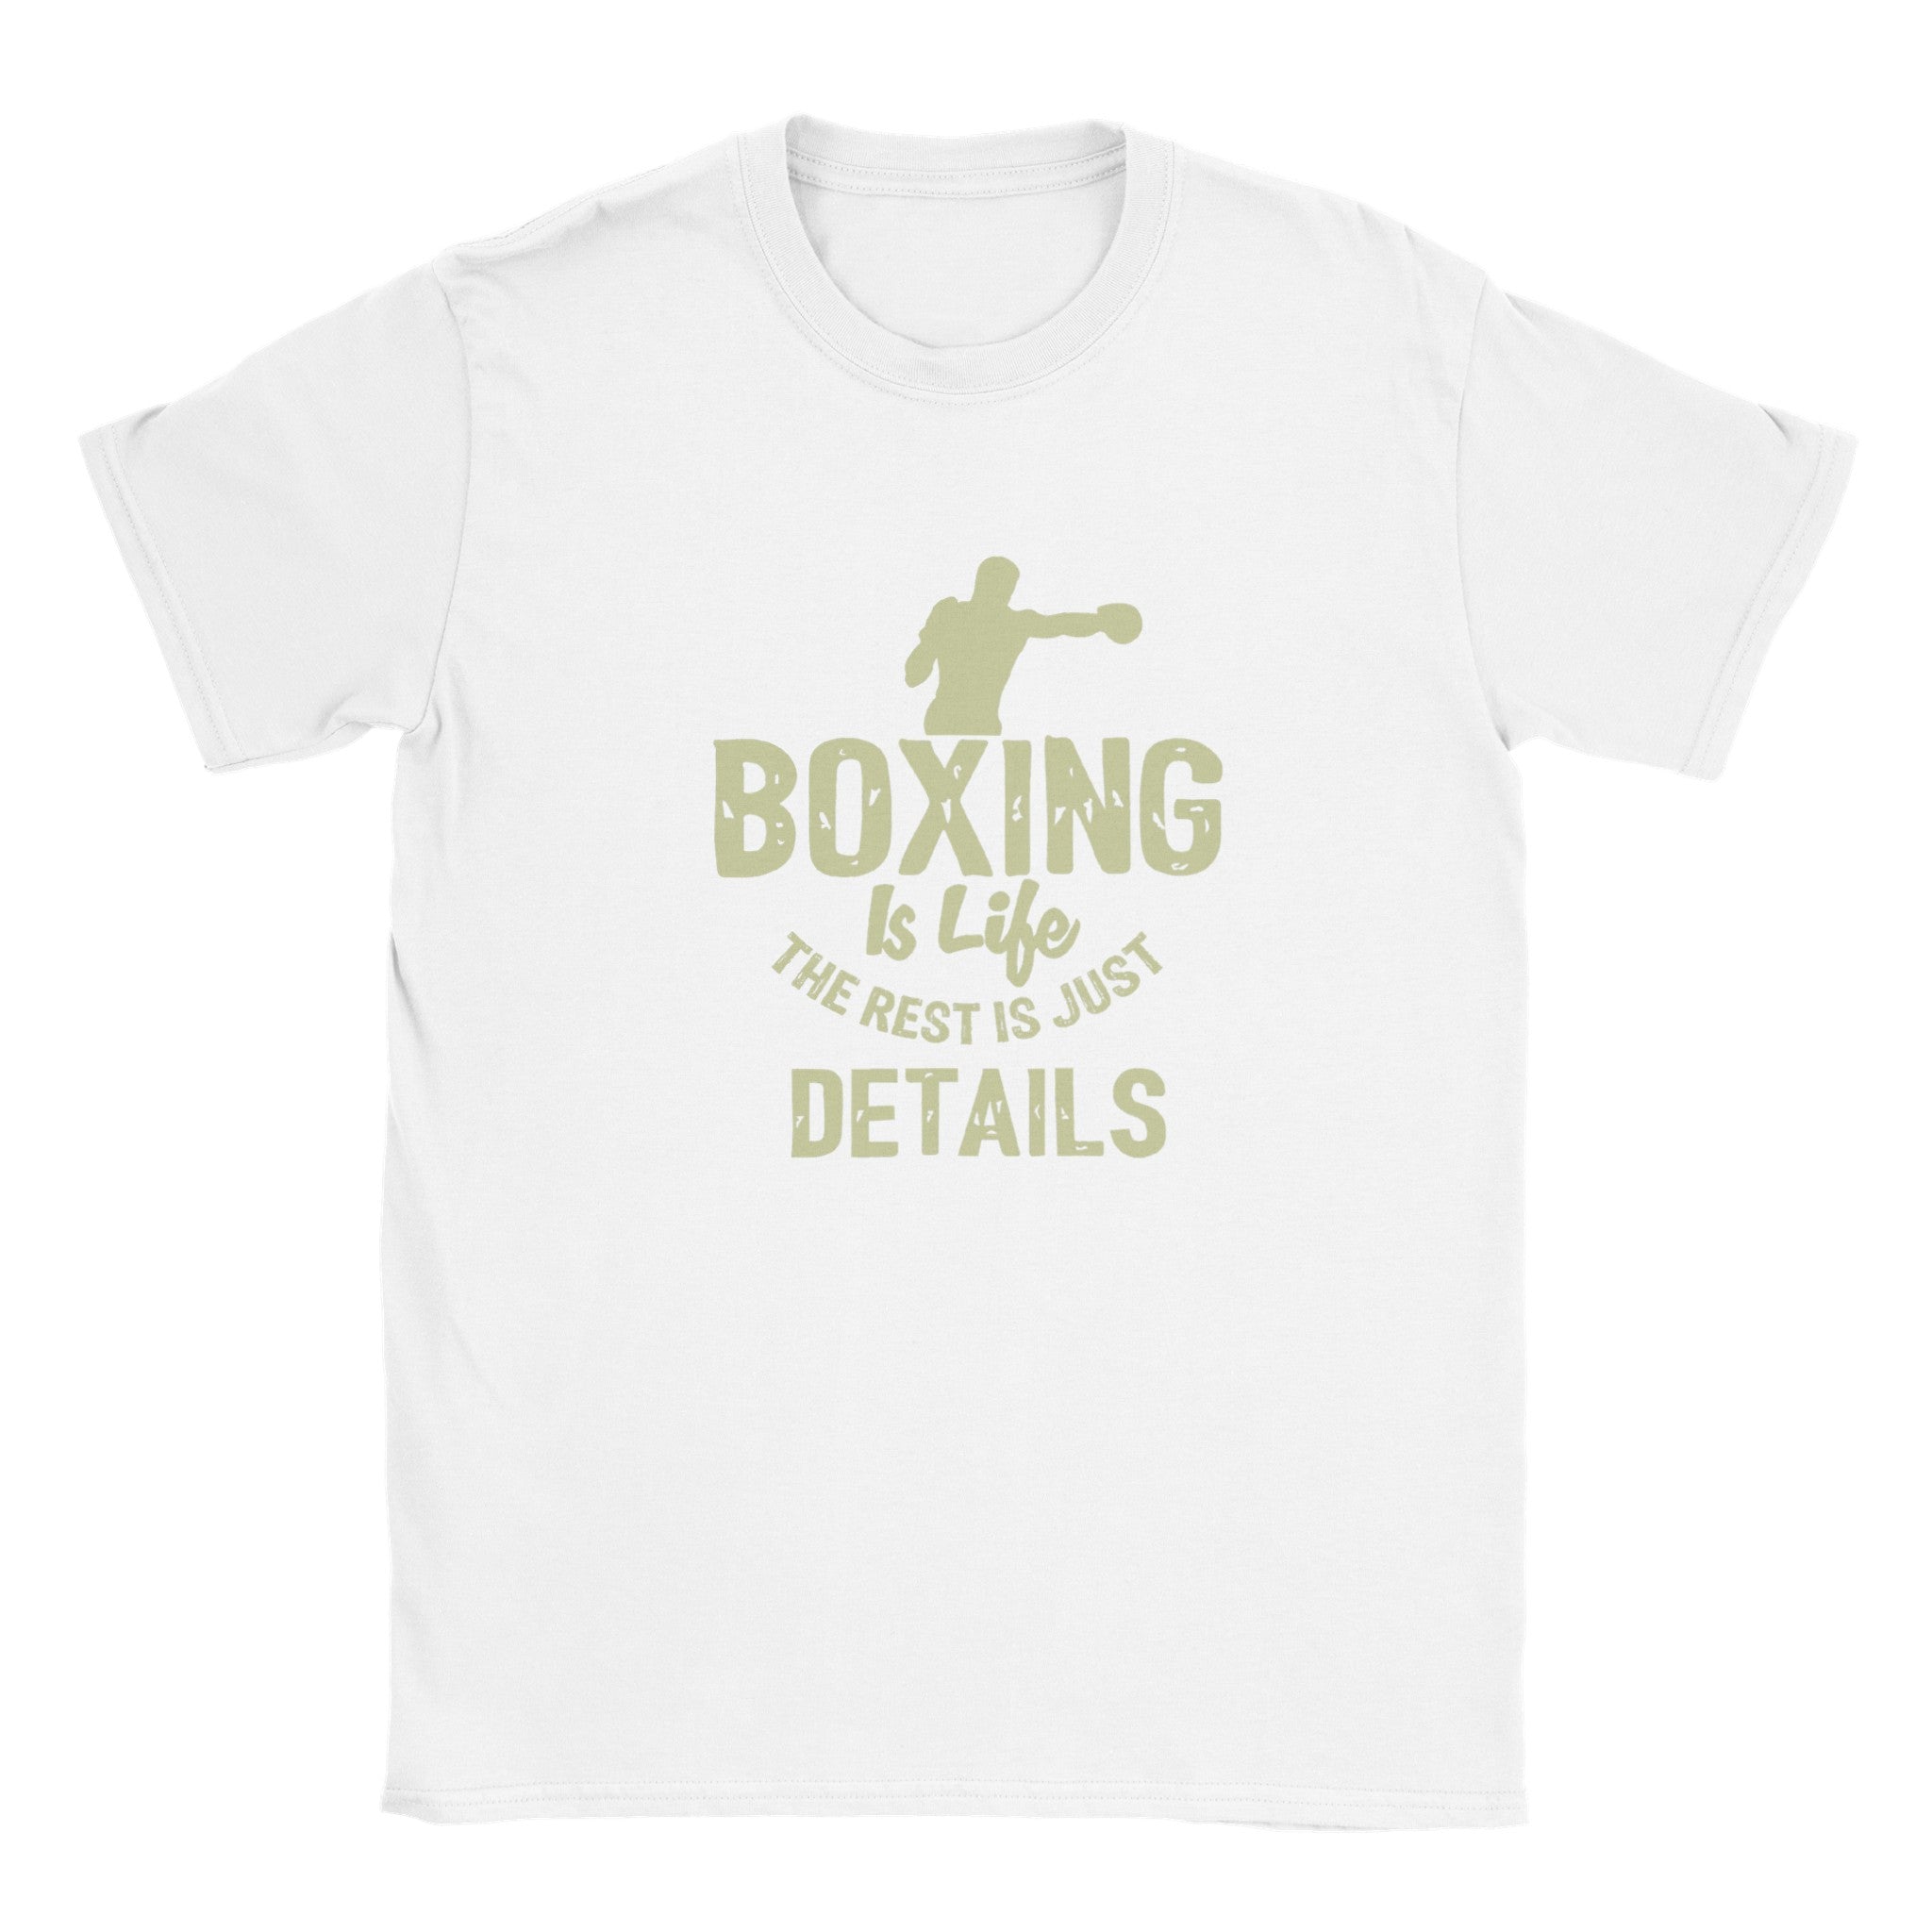 Boxing is Life T-shirt